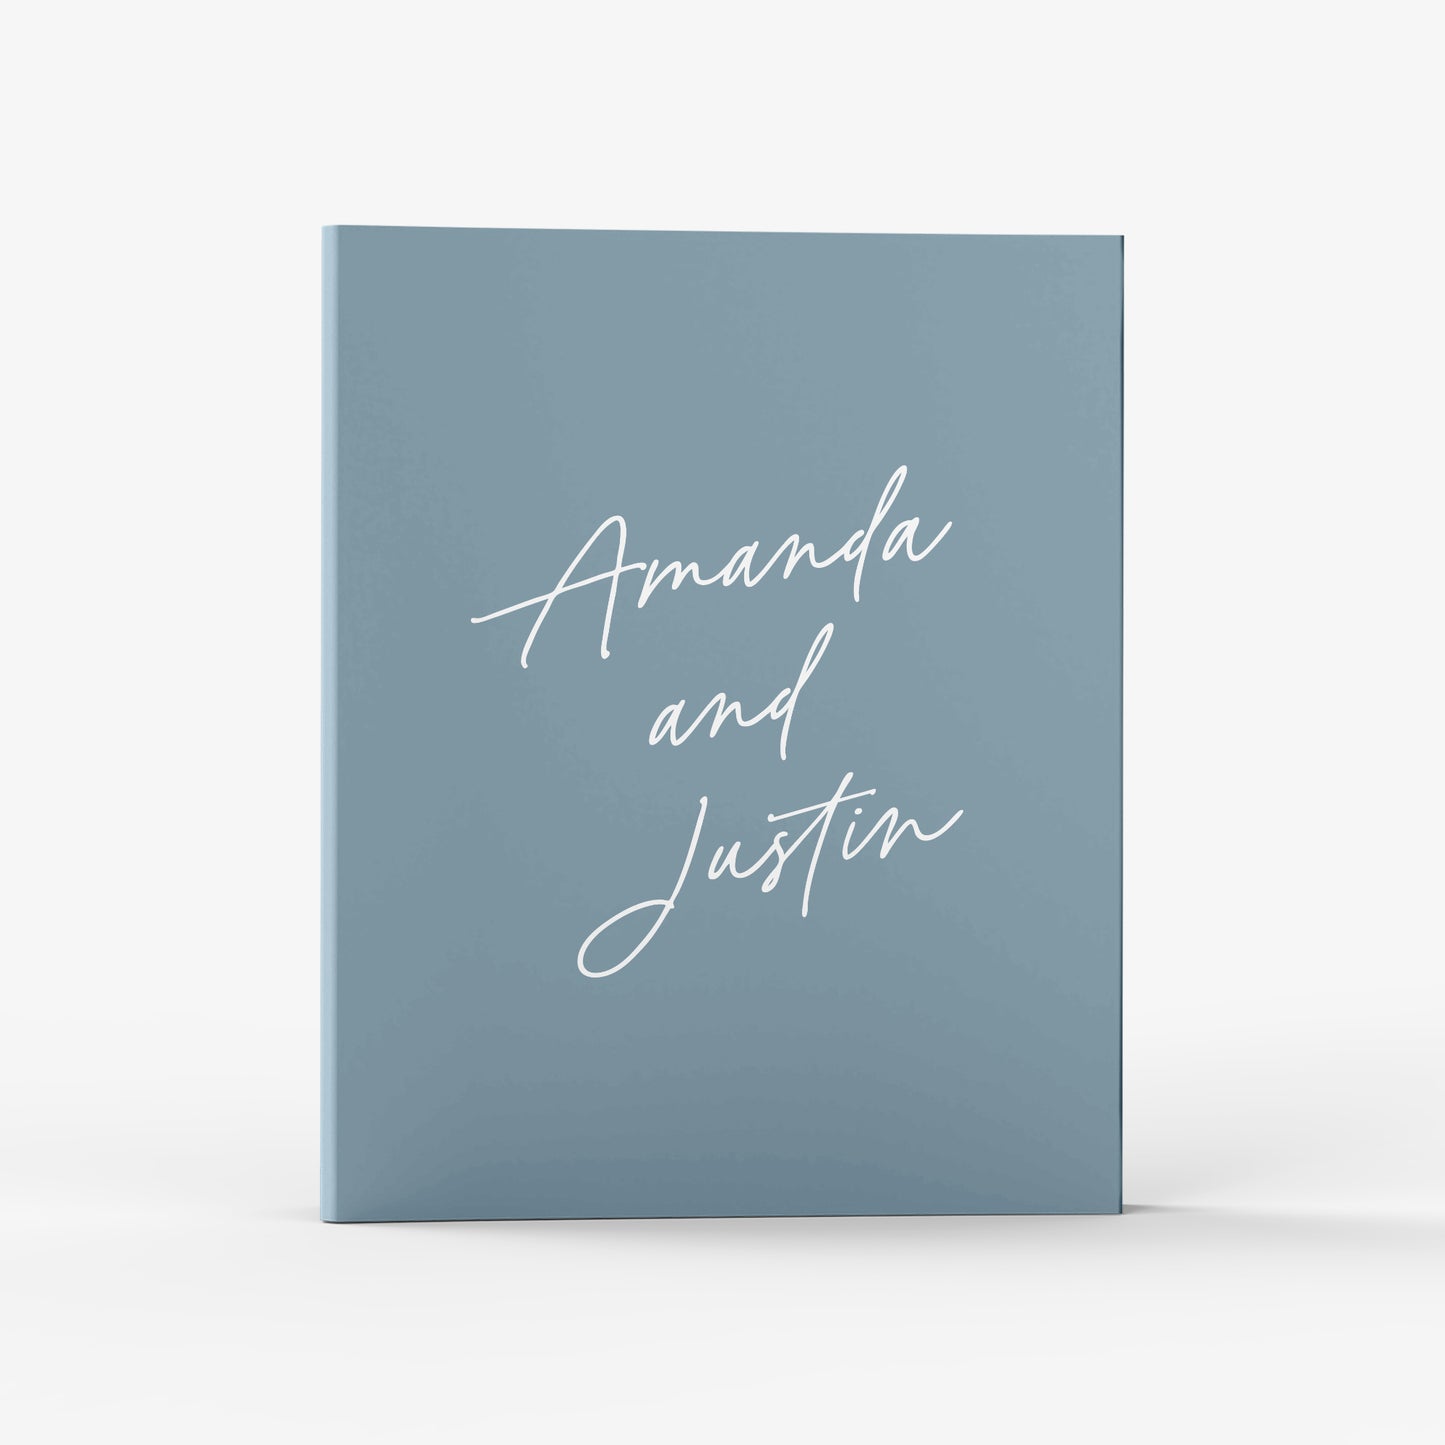 Our wedding binders are the perfect planning tool, shown in an elegant calligraphy design